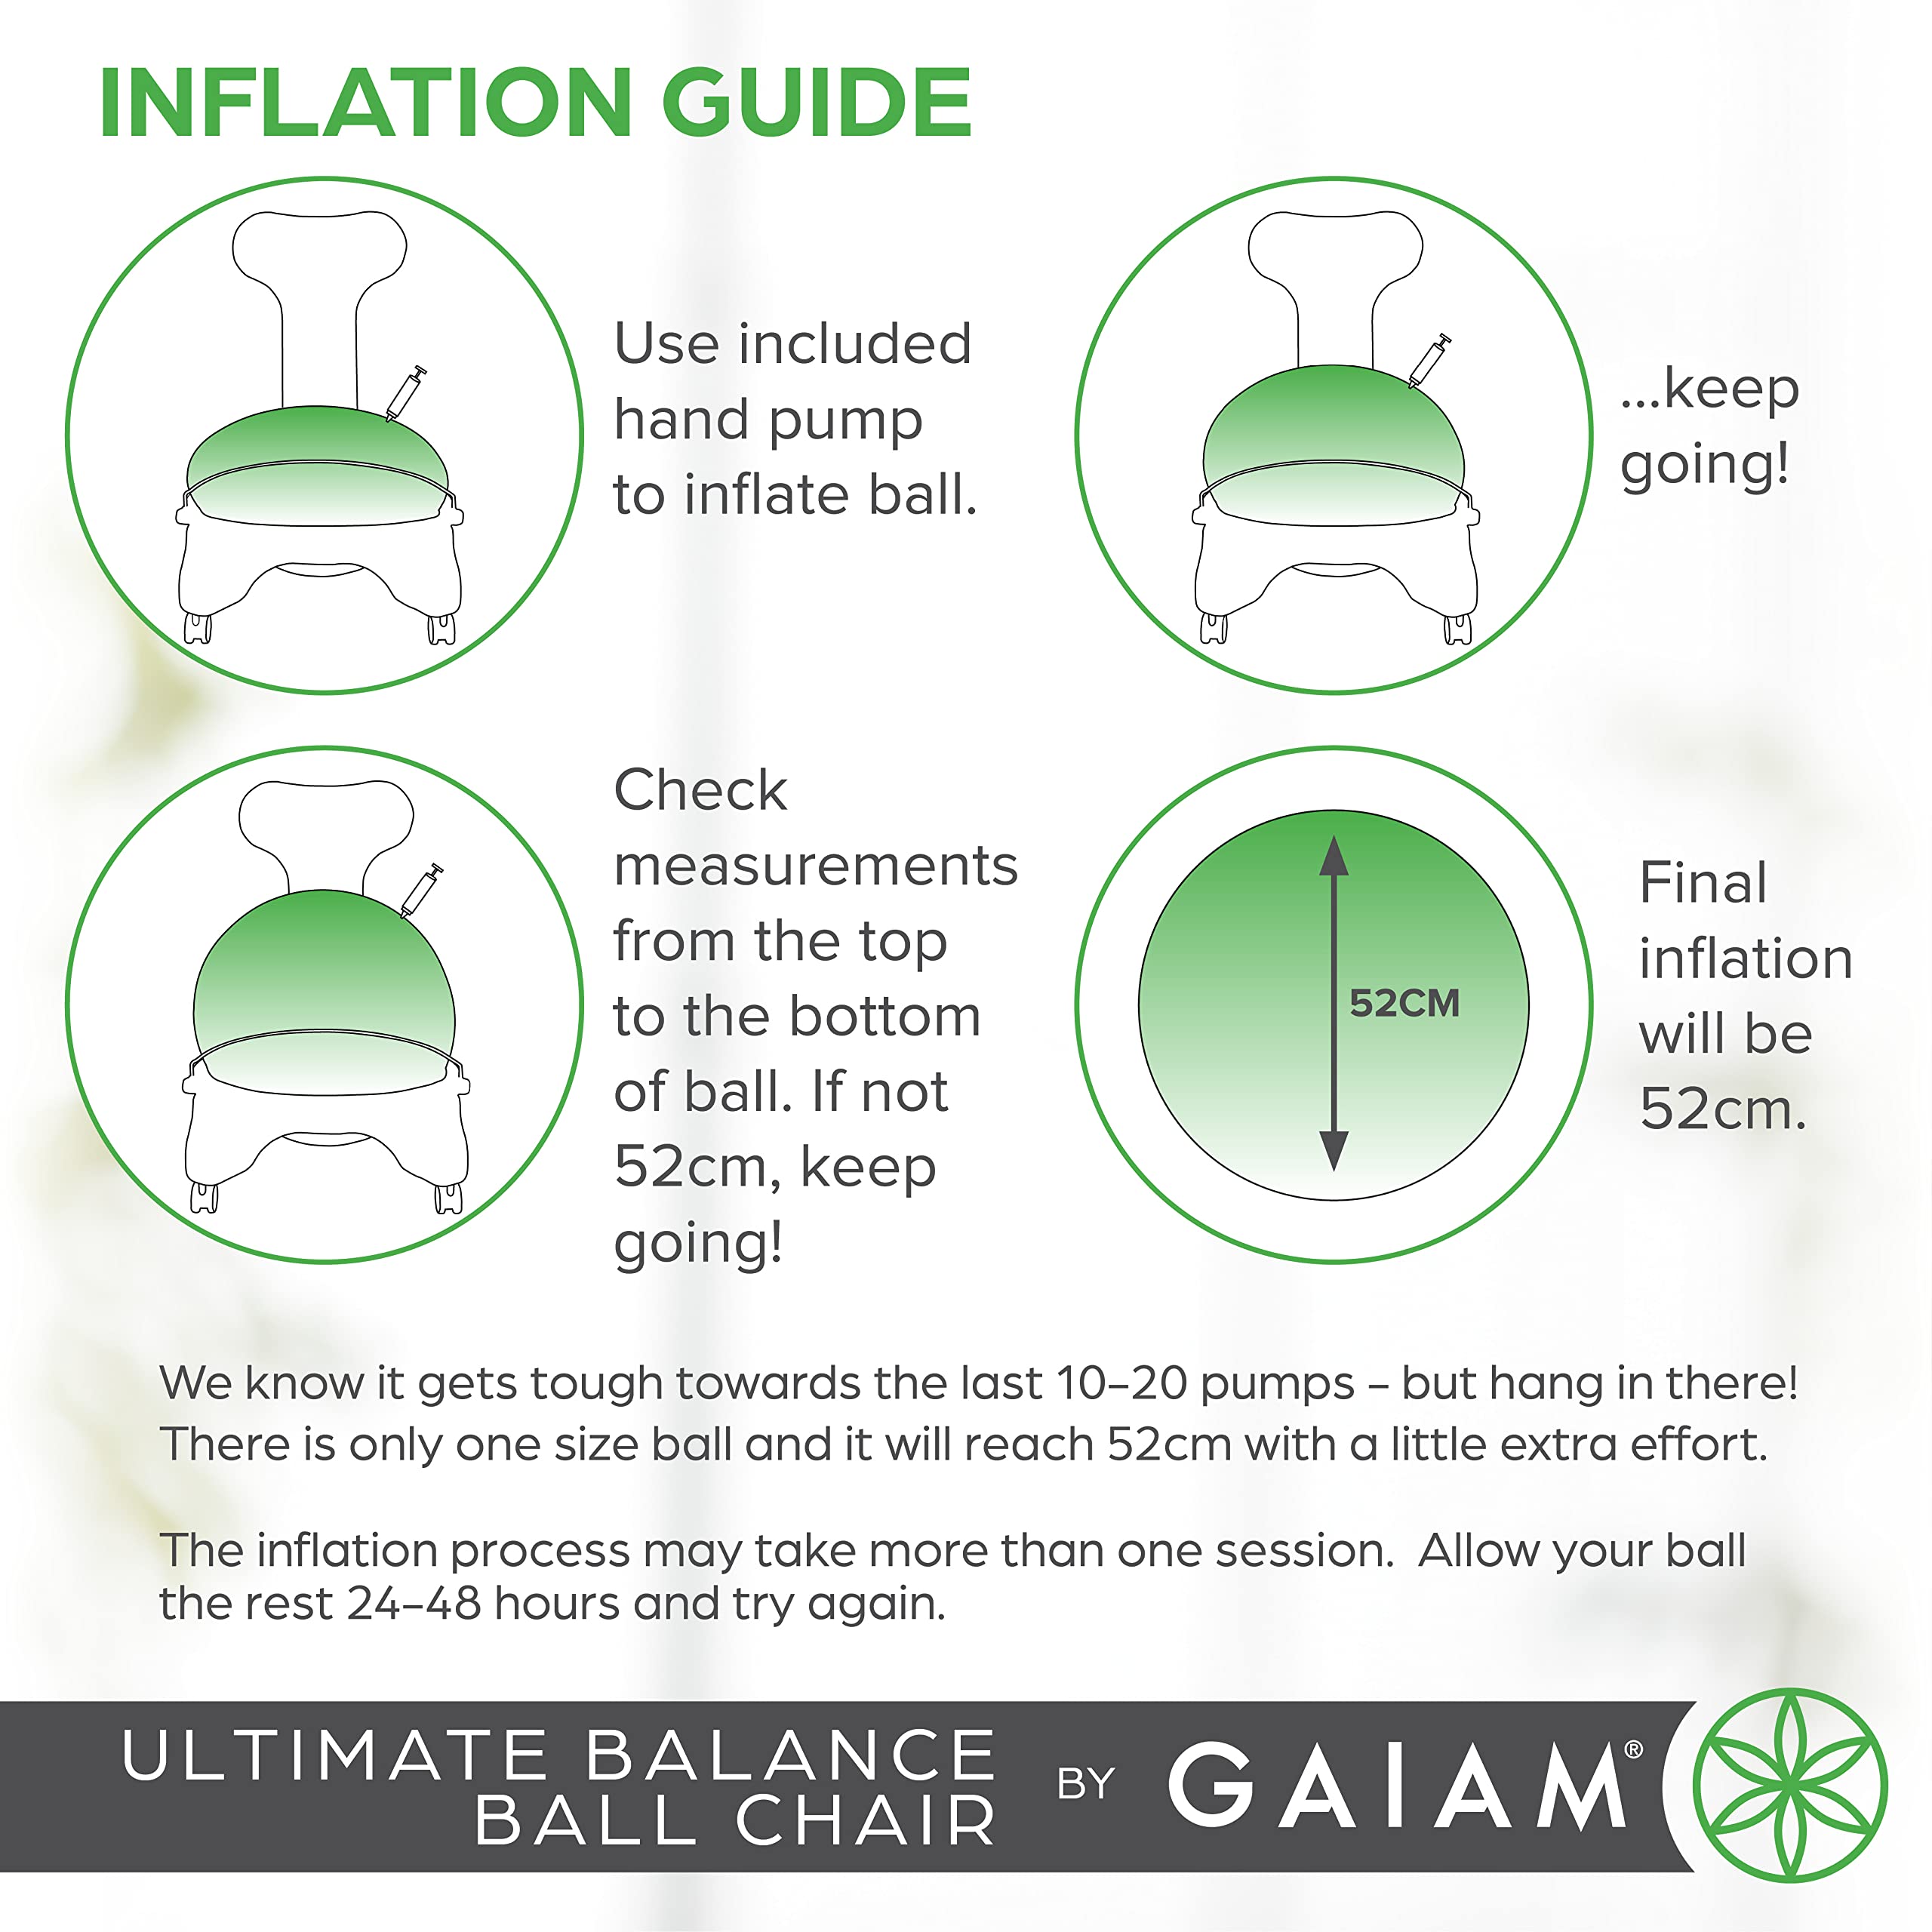 Gaiam Ultimate Balance Ball Chair (Standard or Swivel Base Option) - Premium Exercise Stability Yoga Ball Ergonomic Chair for Home and Office Desk - 52cm Anti-Burst Ball, Air Pump, Exercise Guide